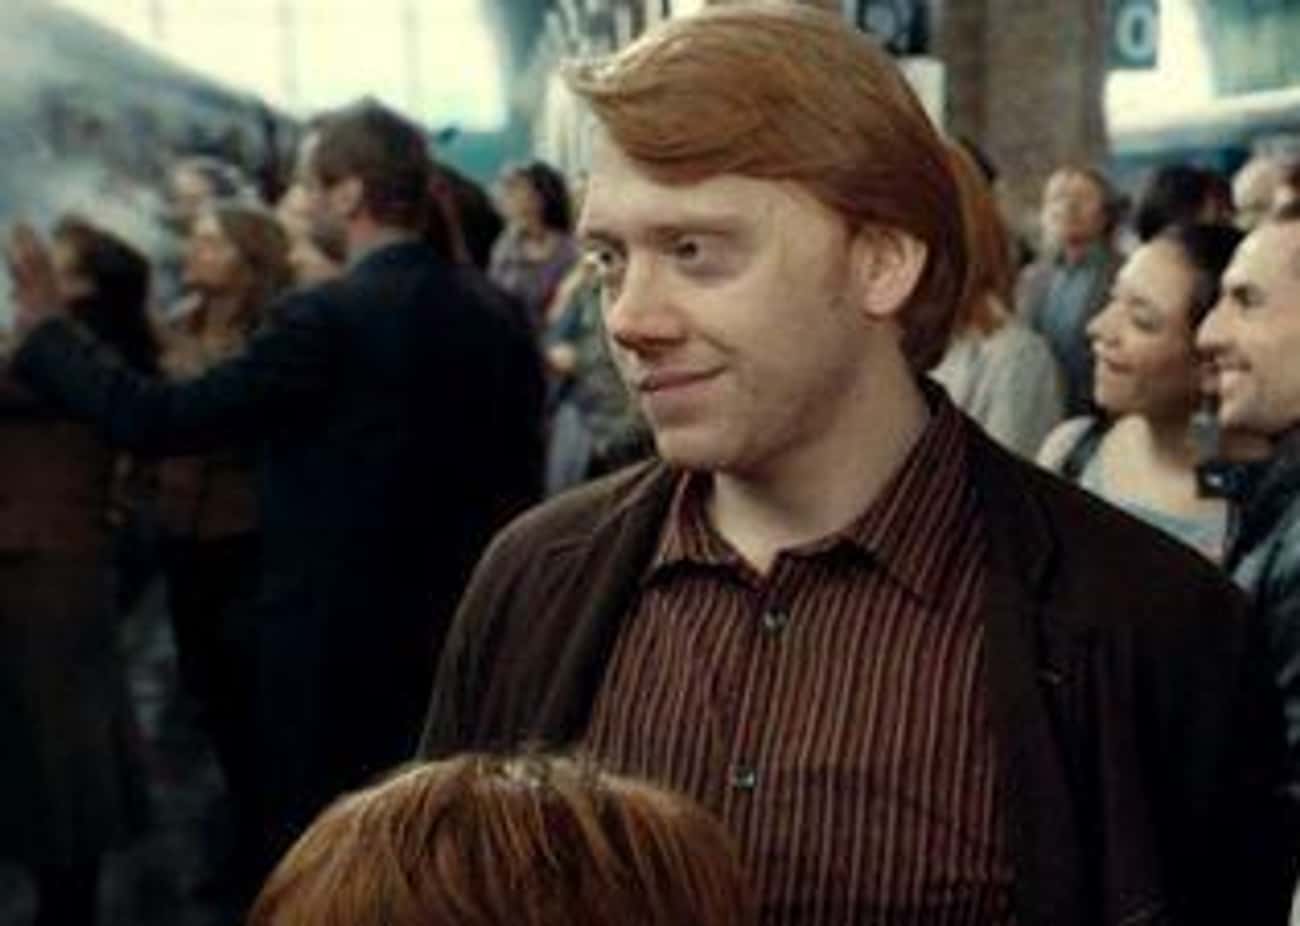 Ron Becomes The Co-Owner Of Weasleys' Wizard Wheezes After Fred's Passing